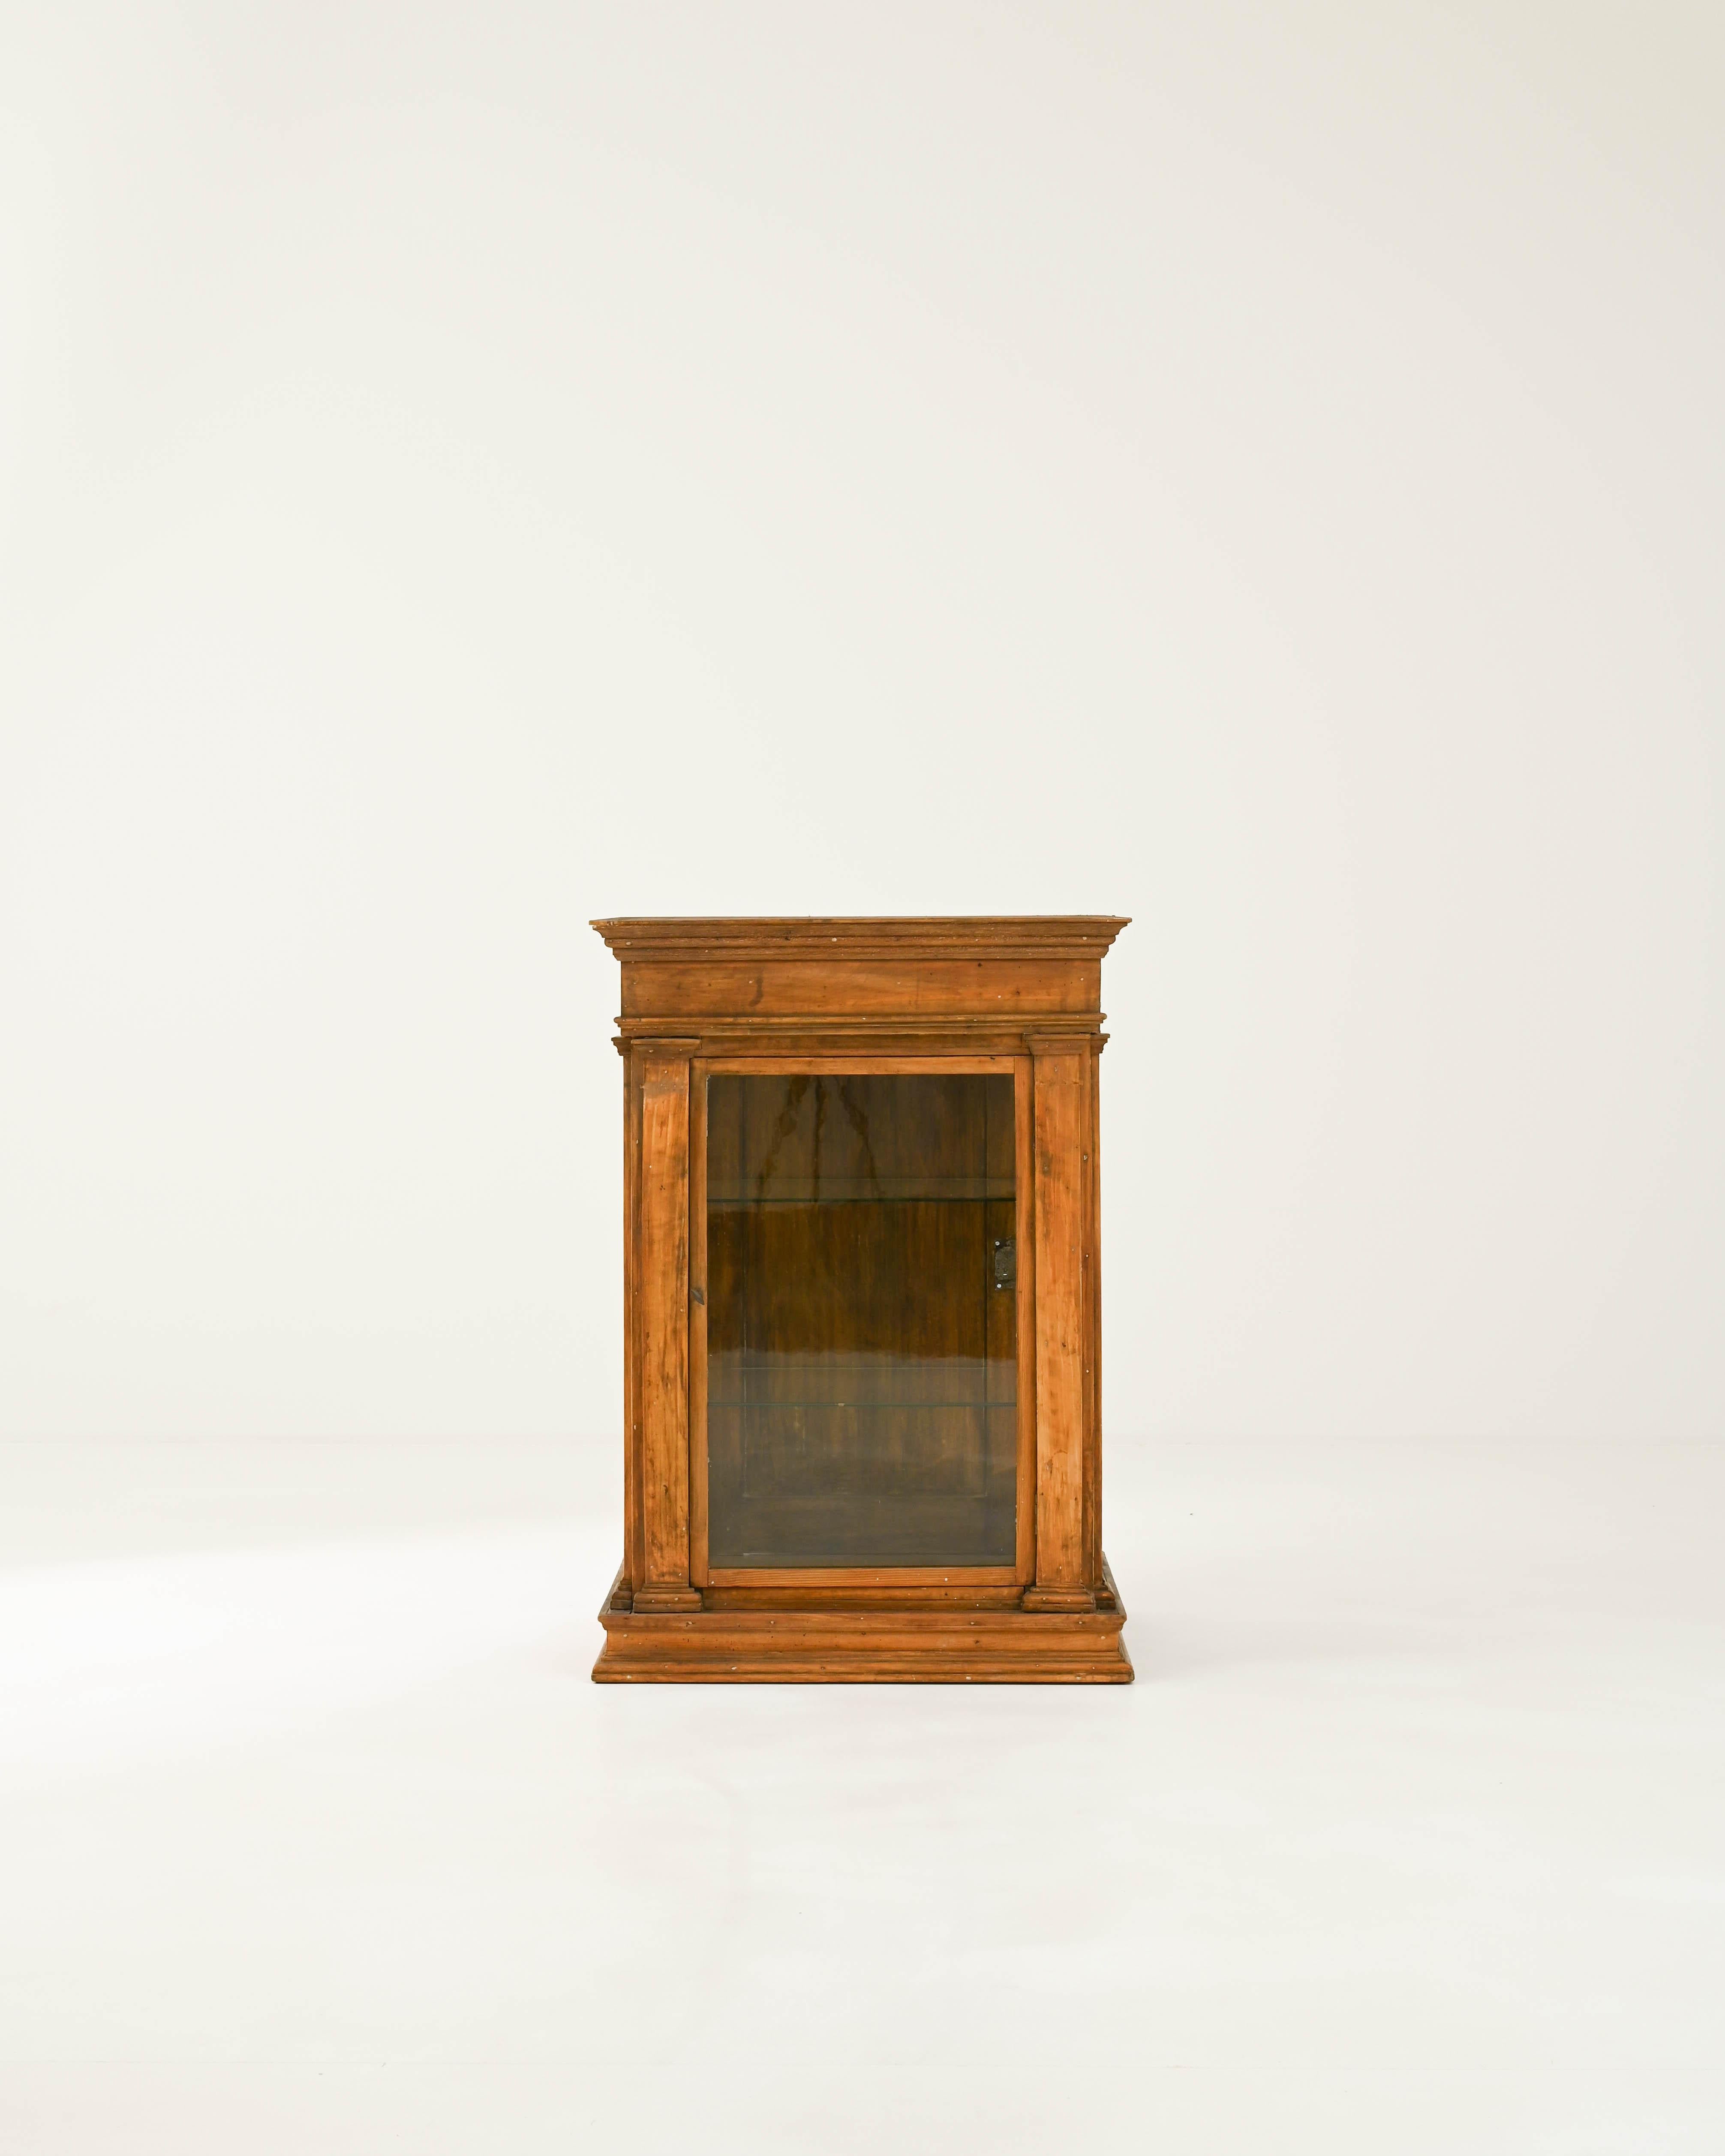 The dignified design and warm patina of this antique wooden vitrine give it a timeless appeal. Hand-built in France in the 1800s, the form has a Neoclassical character: the carved pilasters that frame the windows of the case and the elegant upper